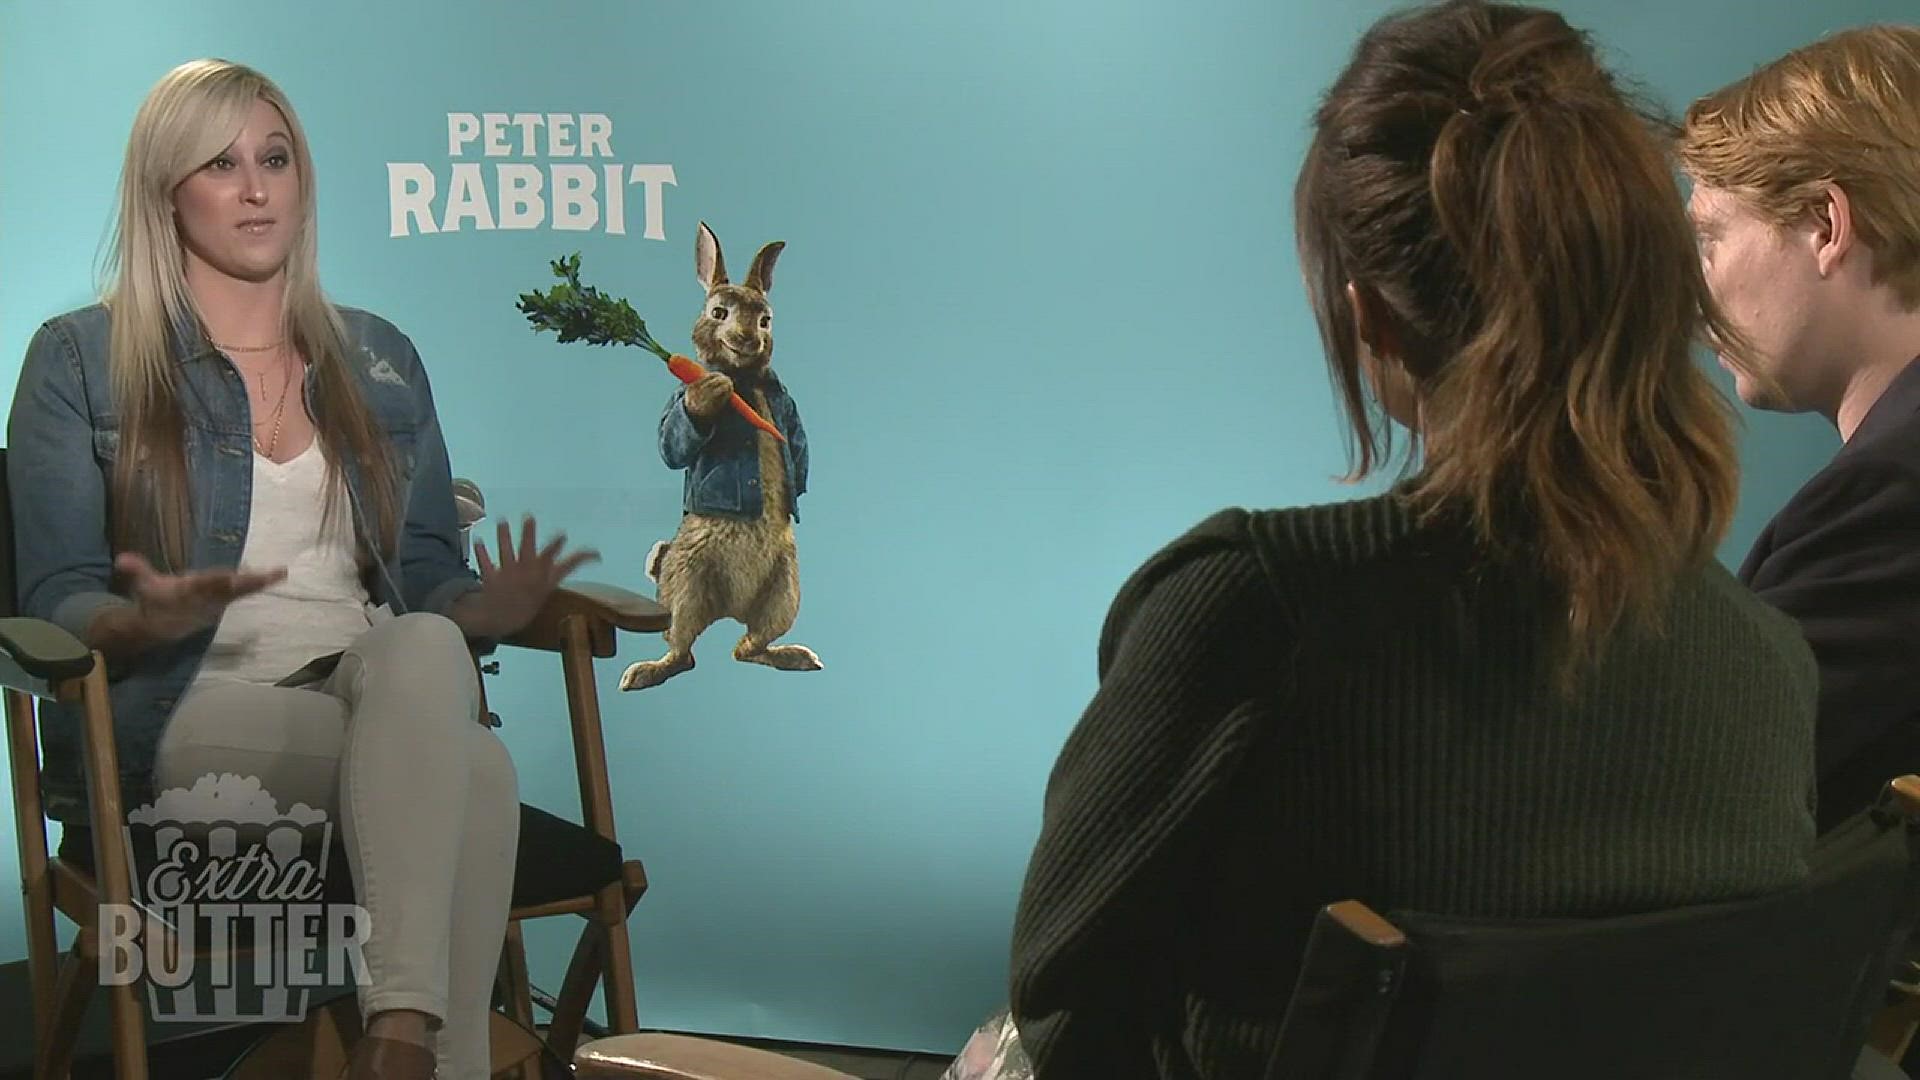 Kelly sits down with Rose Byrne and Domhnall Gleeson to talk about "Peter Rabbit." (Travel and accommodations paid for by Sony Pictures Releasing).